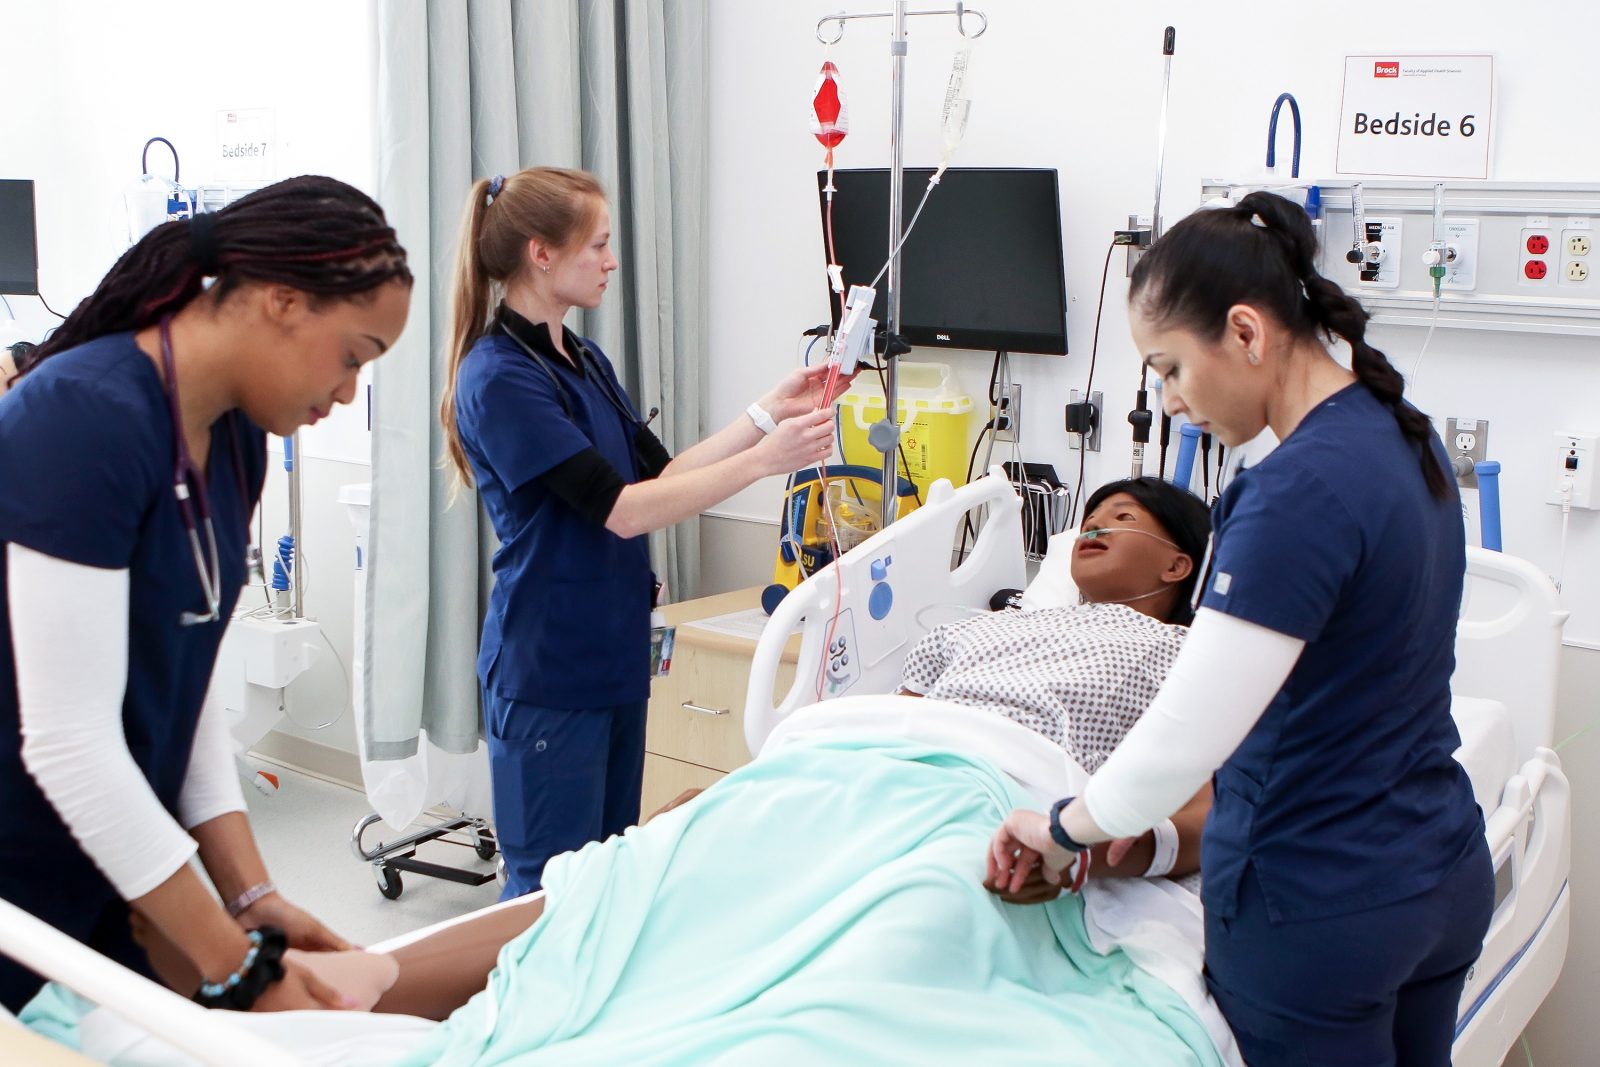 Three nursing students check the blood levels and pulse of a patient simulator.